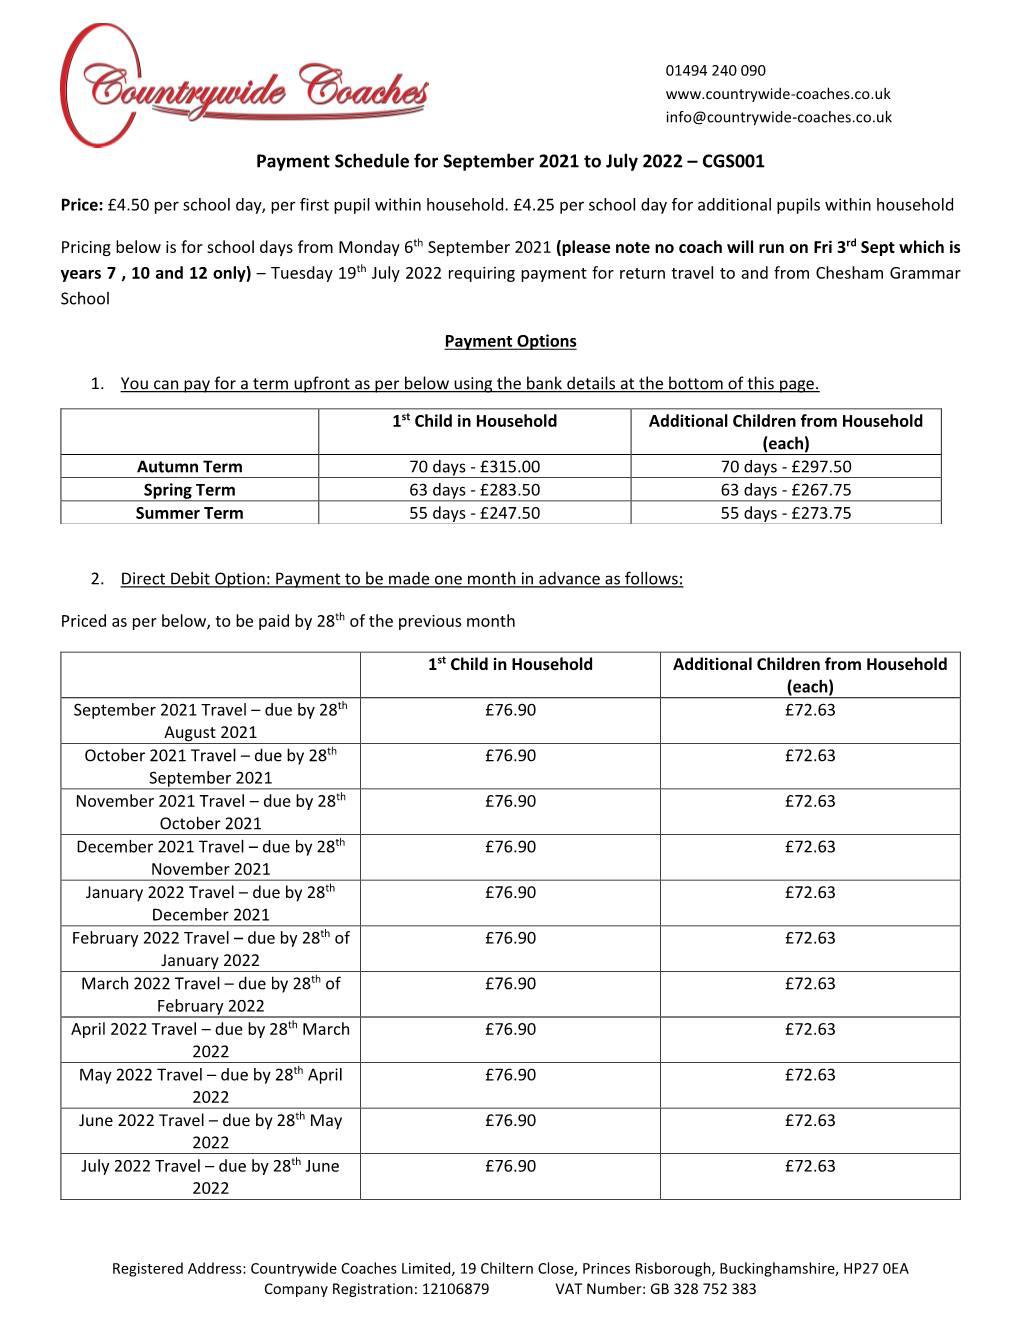 Payment Schedule for September 2021 to July 2022 – CGS001